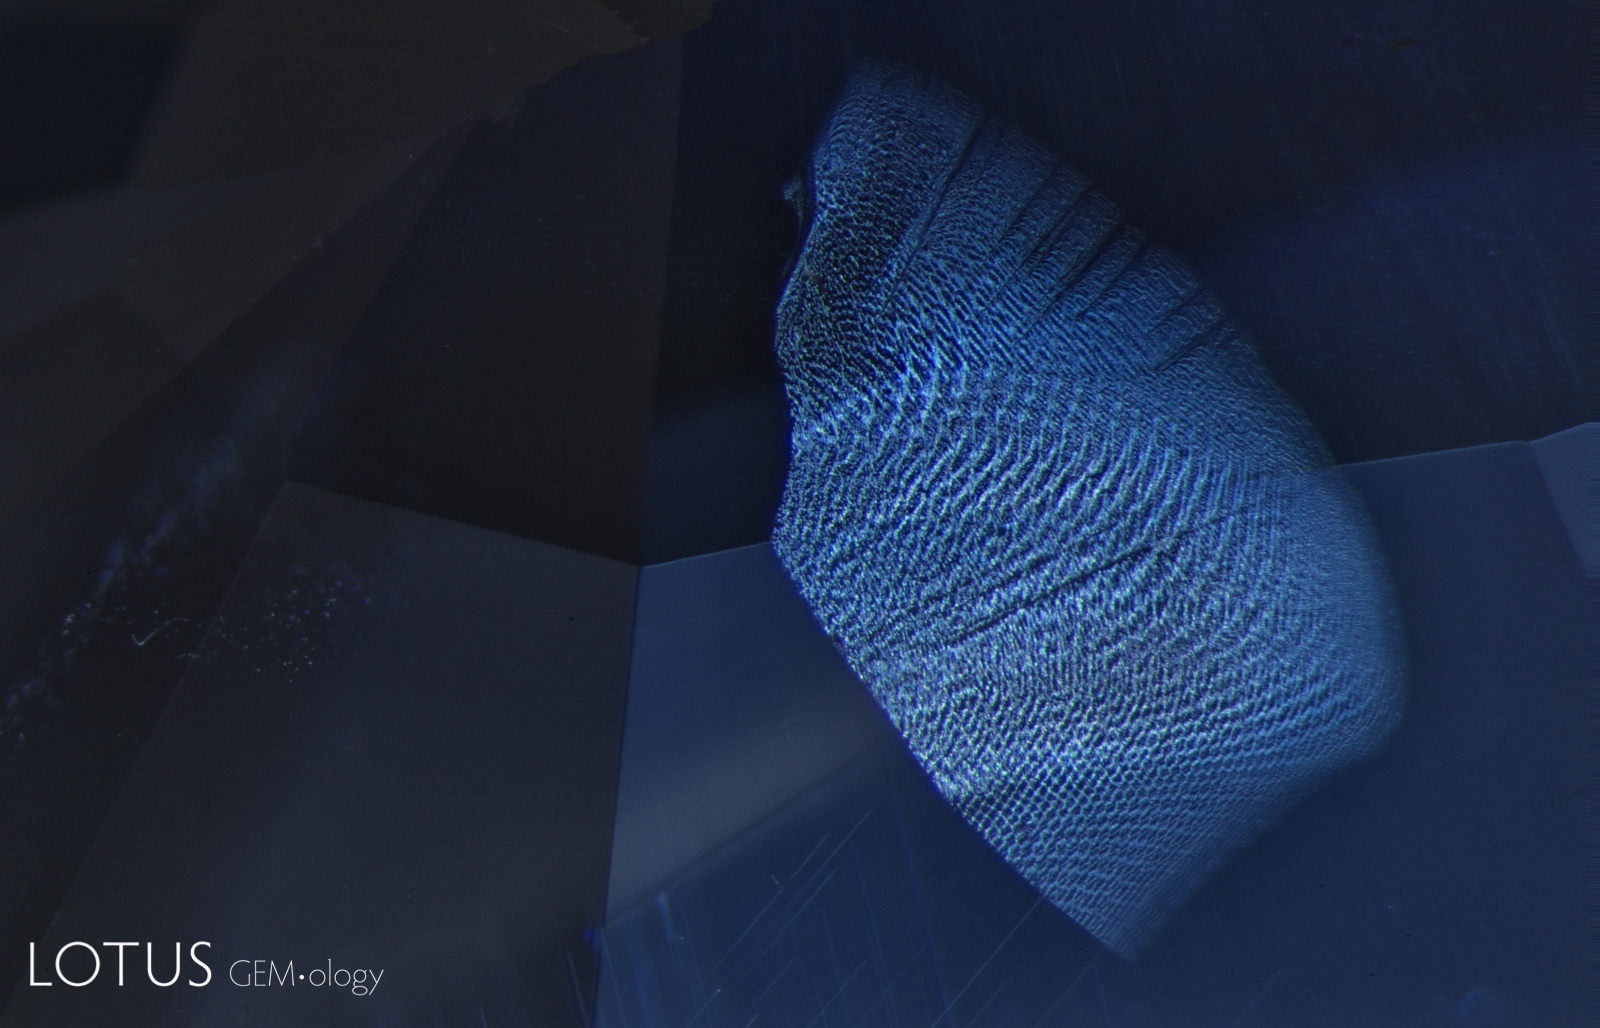 Demonstrating that the inner world can be as captivating as that outside, this Madagascar sapphire displays a small fingerprint scar with a beguiling moiré pattern. The undamaged nature of this inclusion testifies to the natural, untreated origin of the gem.